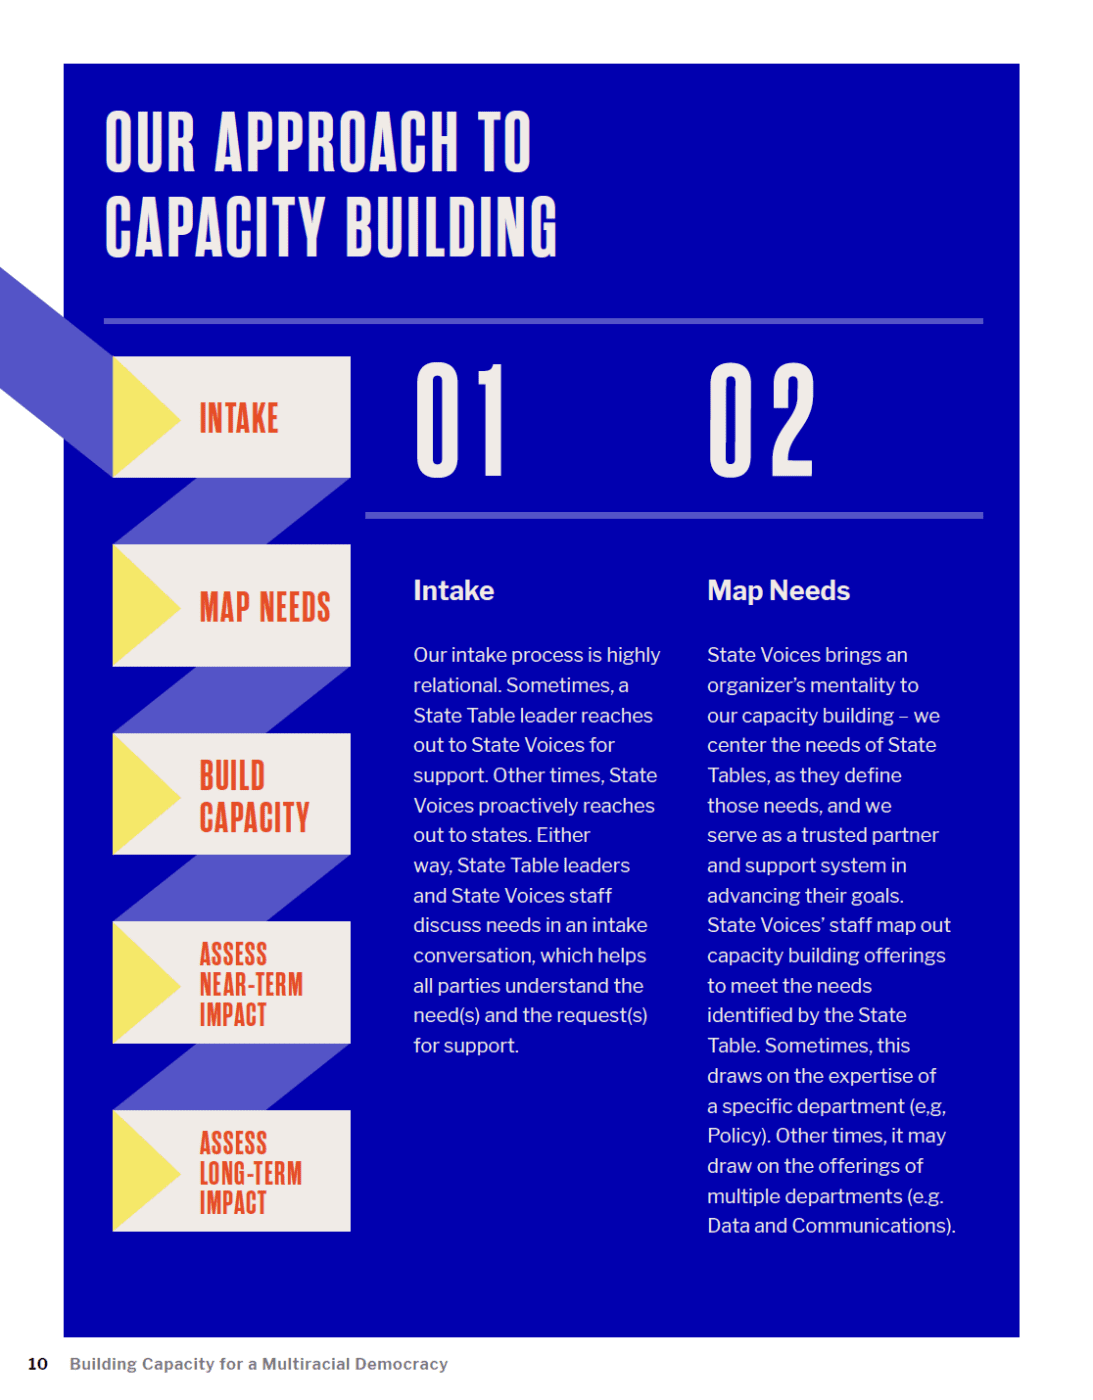 Our Approach to Capacity Building